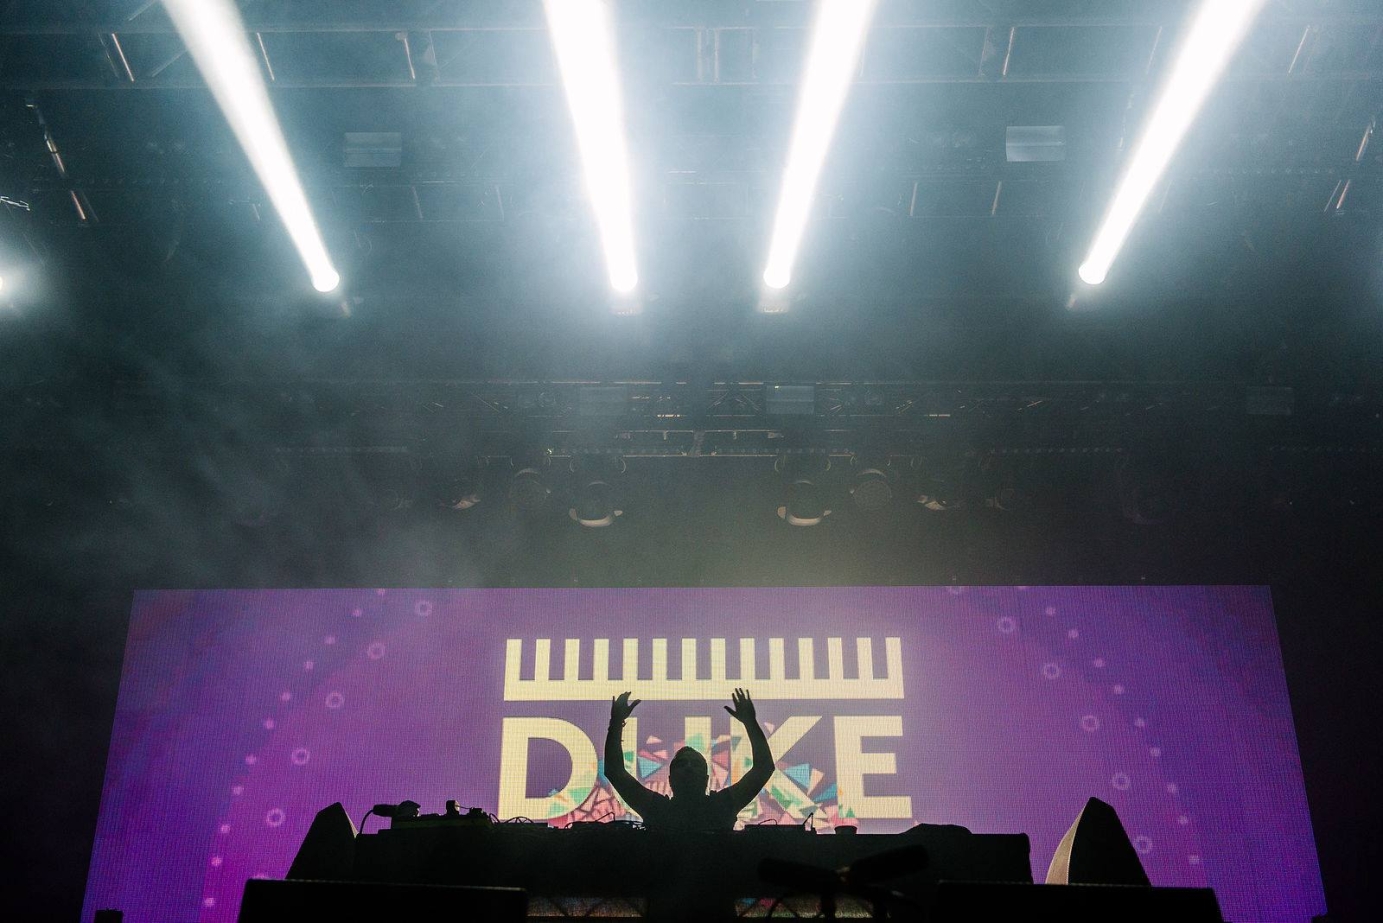 Live visuals for Duke Dumont by Henry Crawfurd